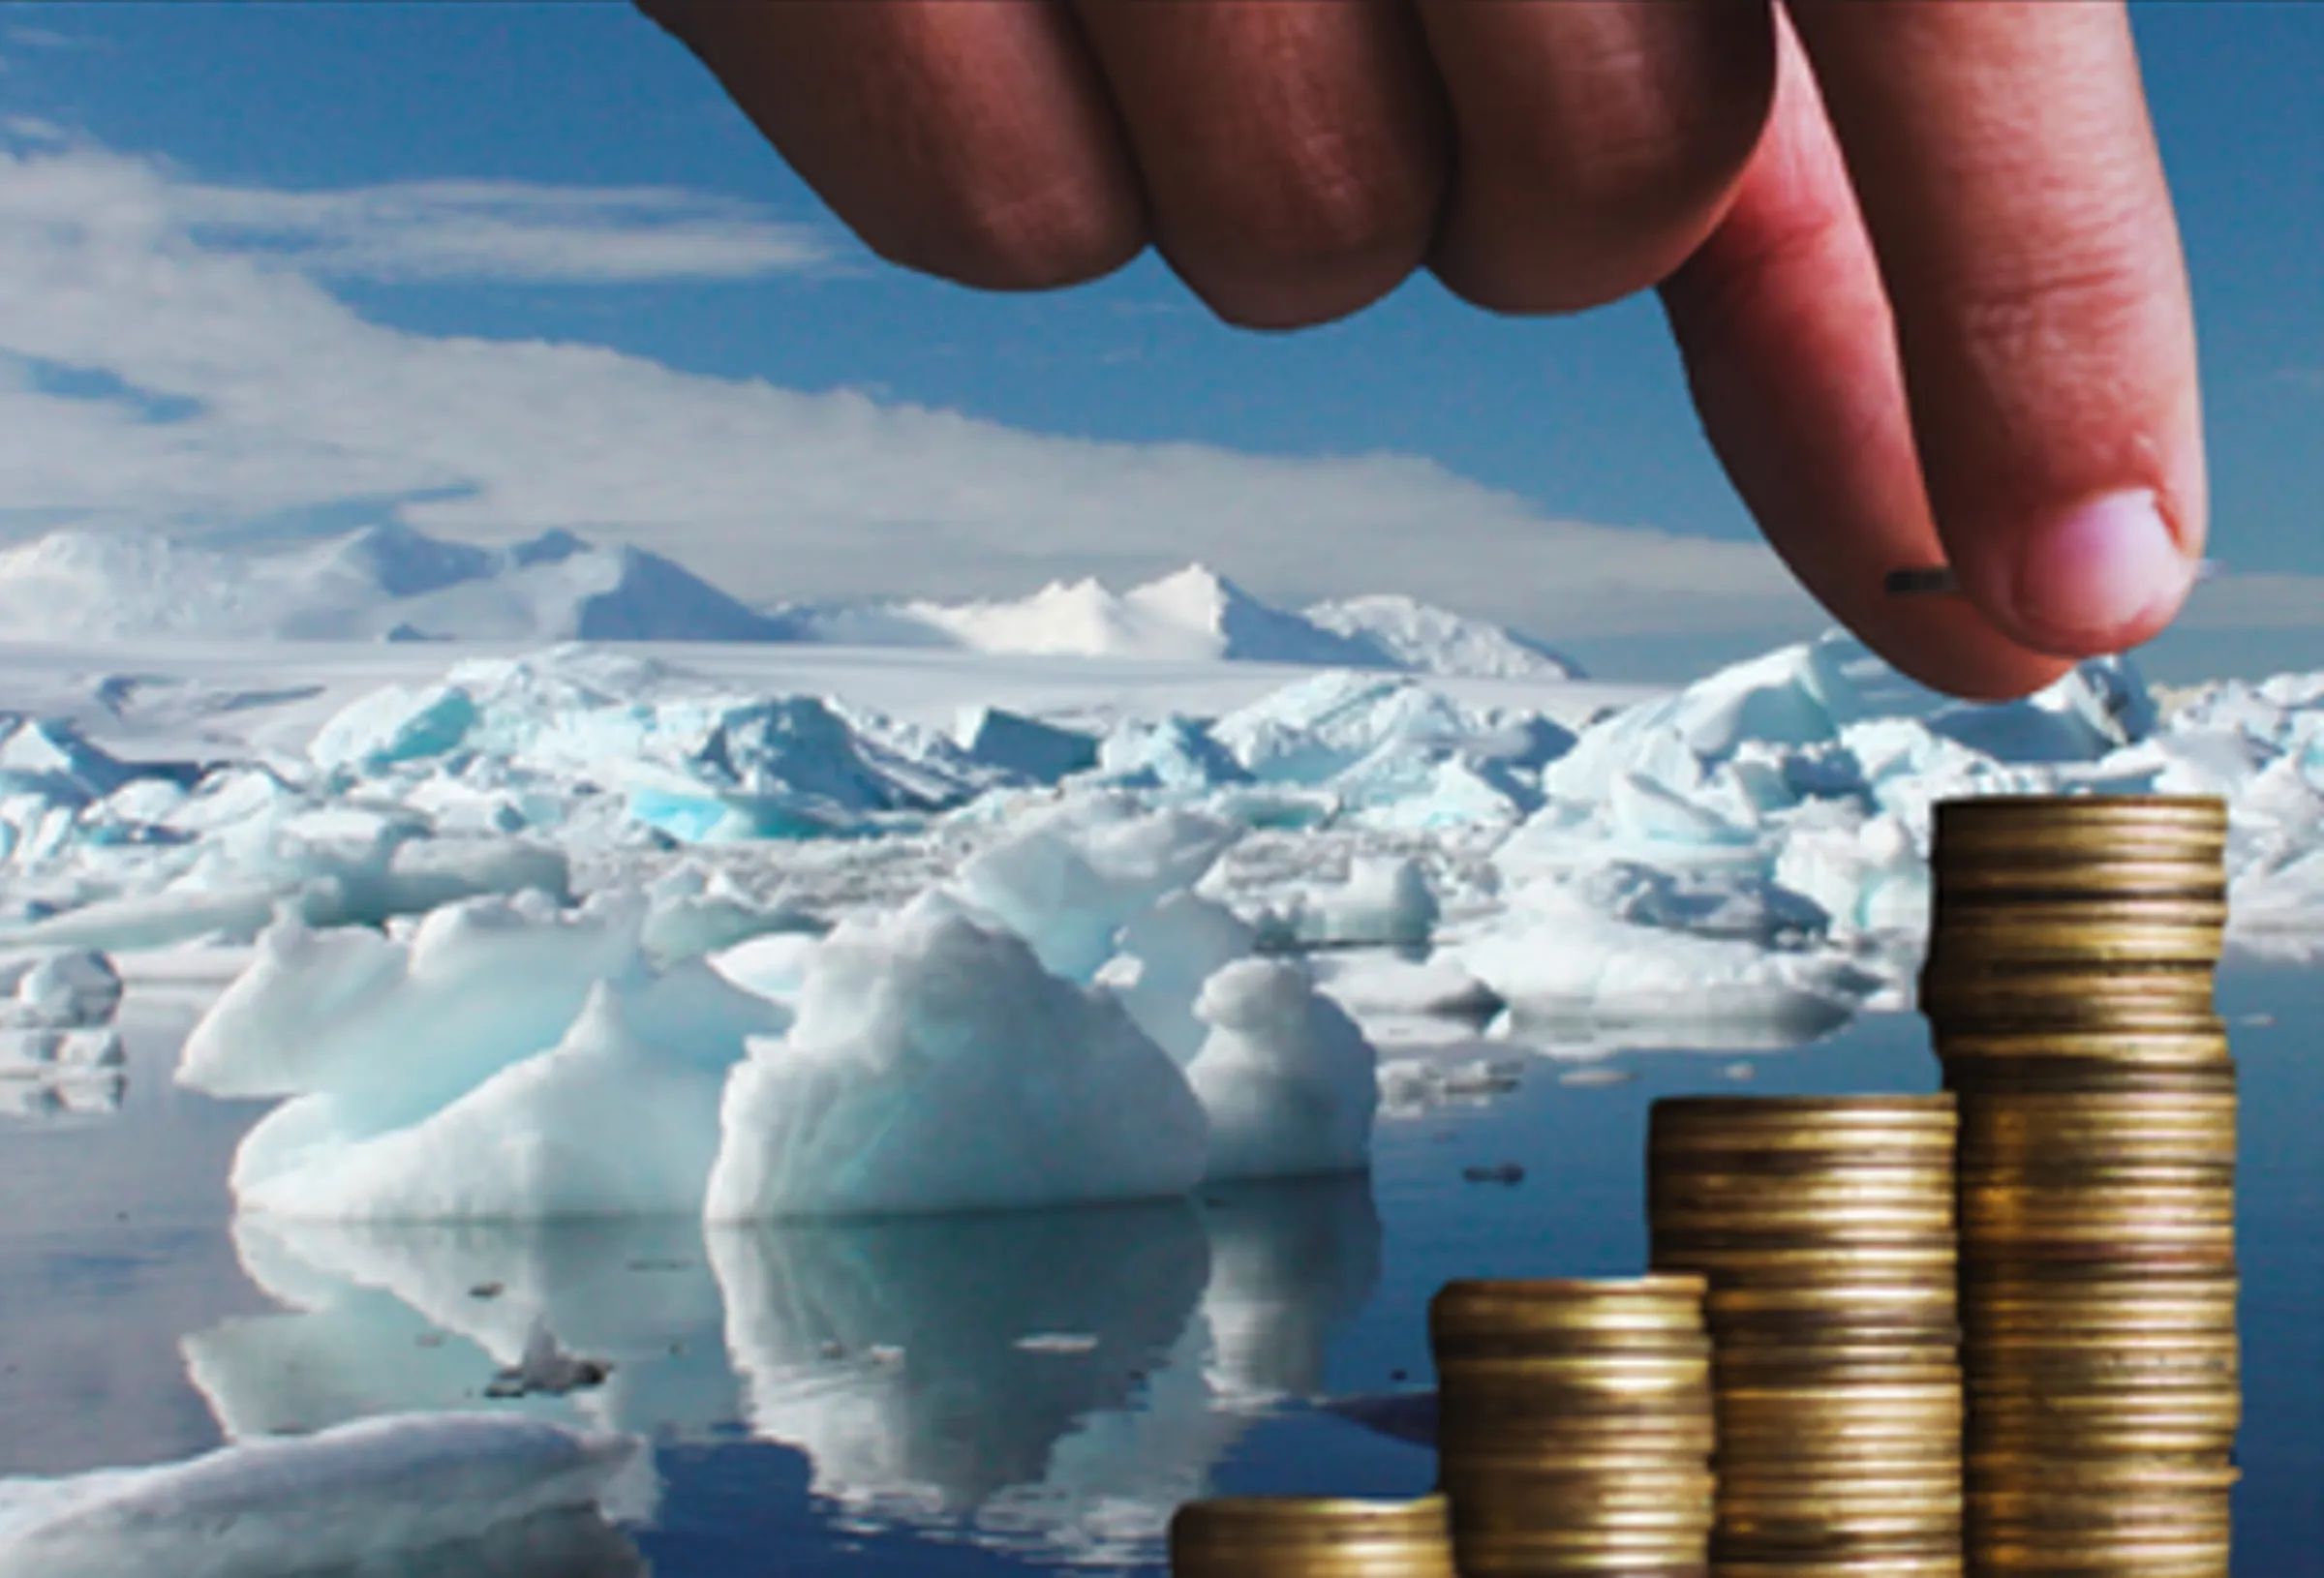 A hand arranging coins is pictured in front of glacier in this illustration